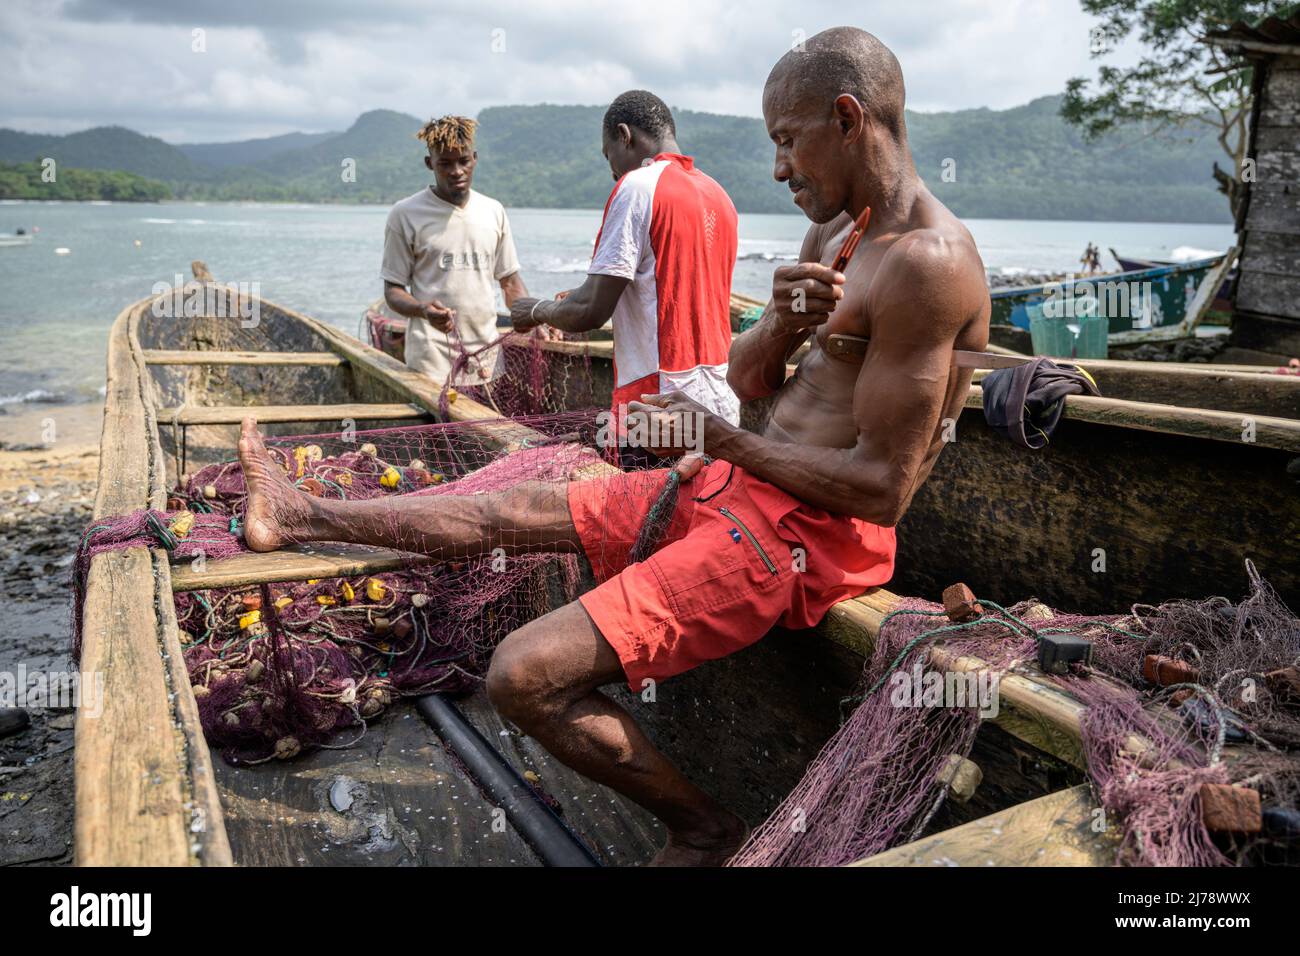 Fishermen repairing the fishing nets on the canoe before going out to fish. Stock Photo